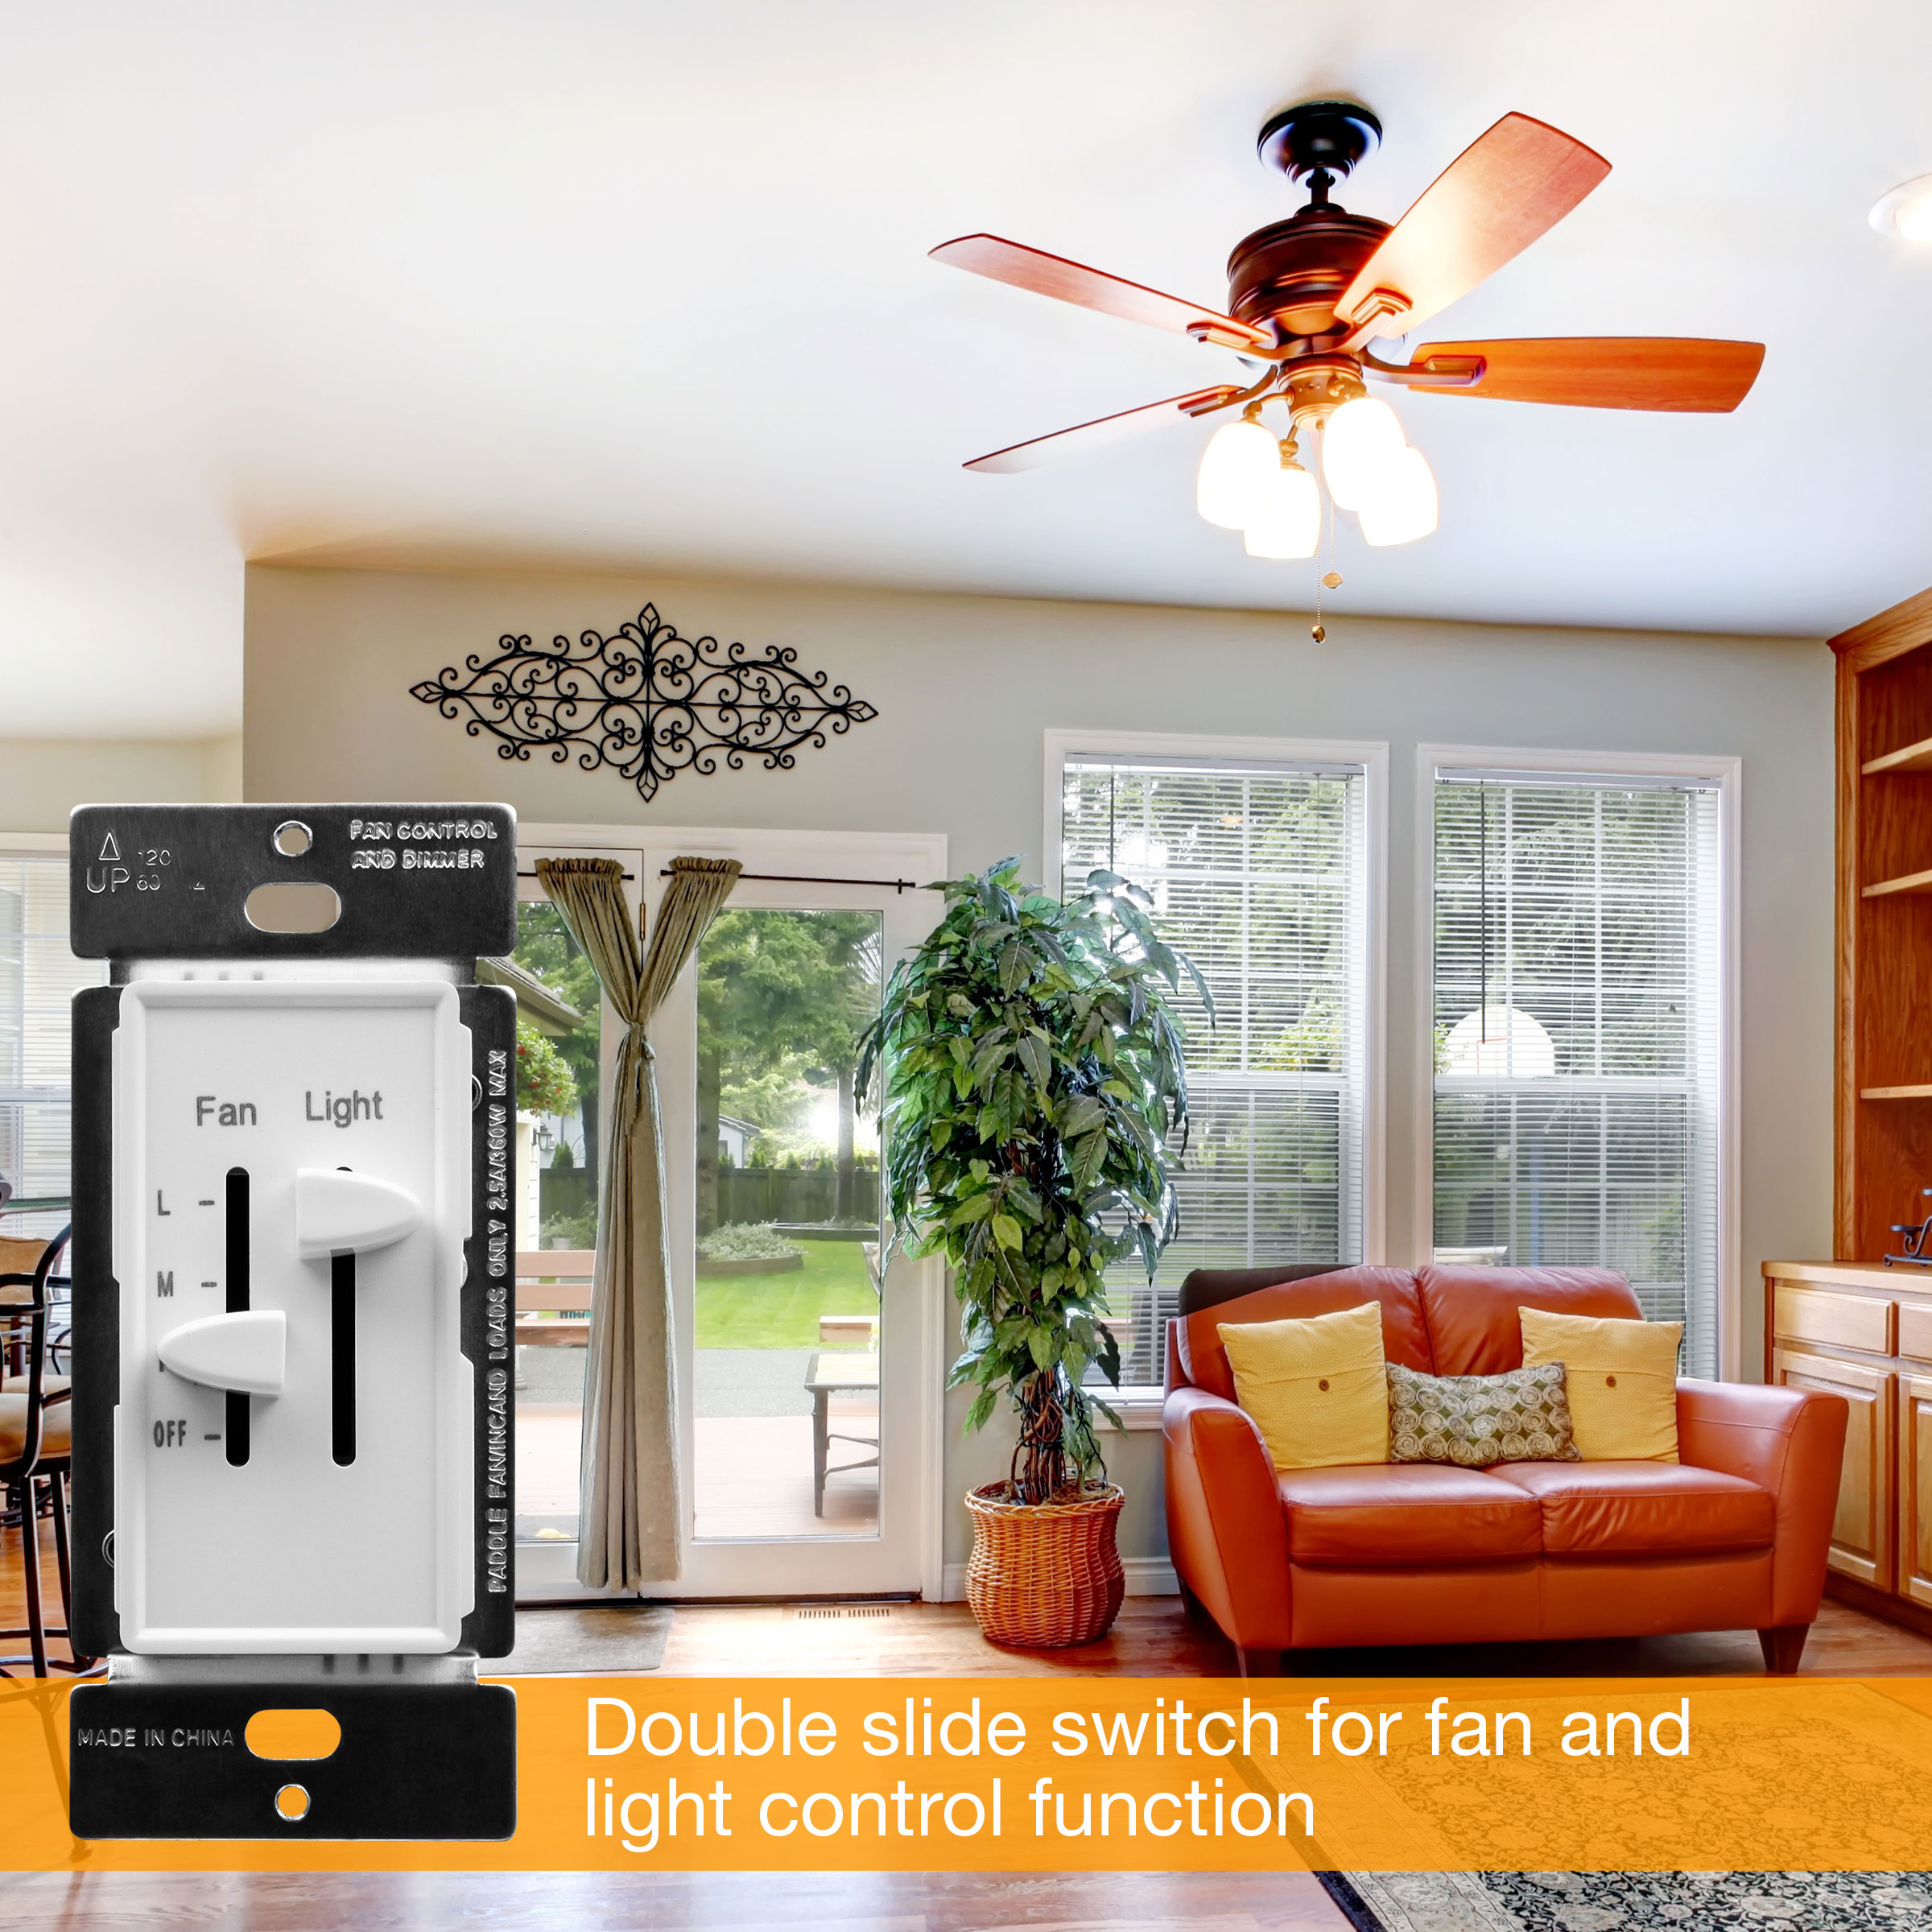 3 Speed Ceiling Fan Control and LED Dimmer Light Switch